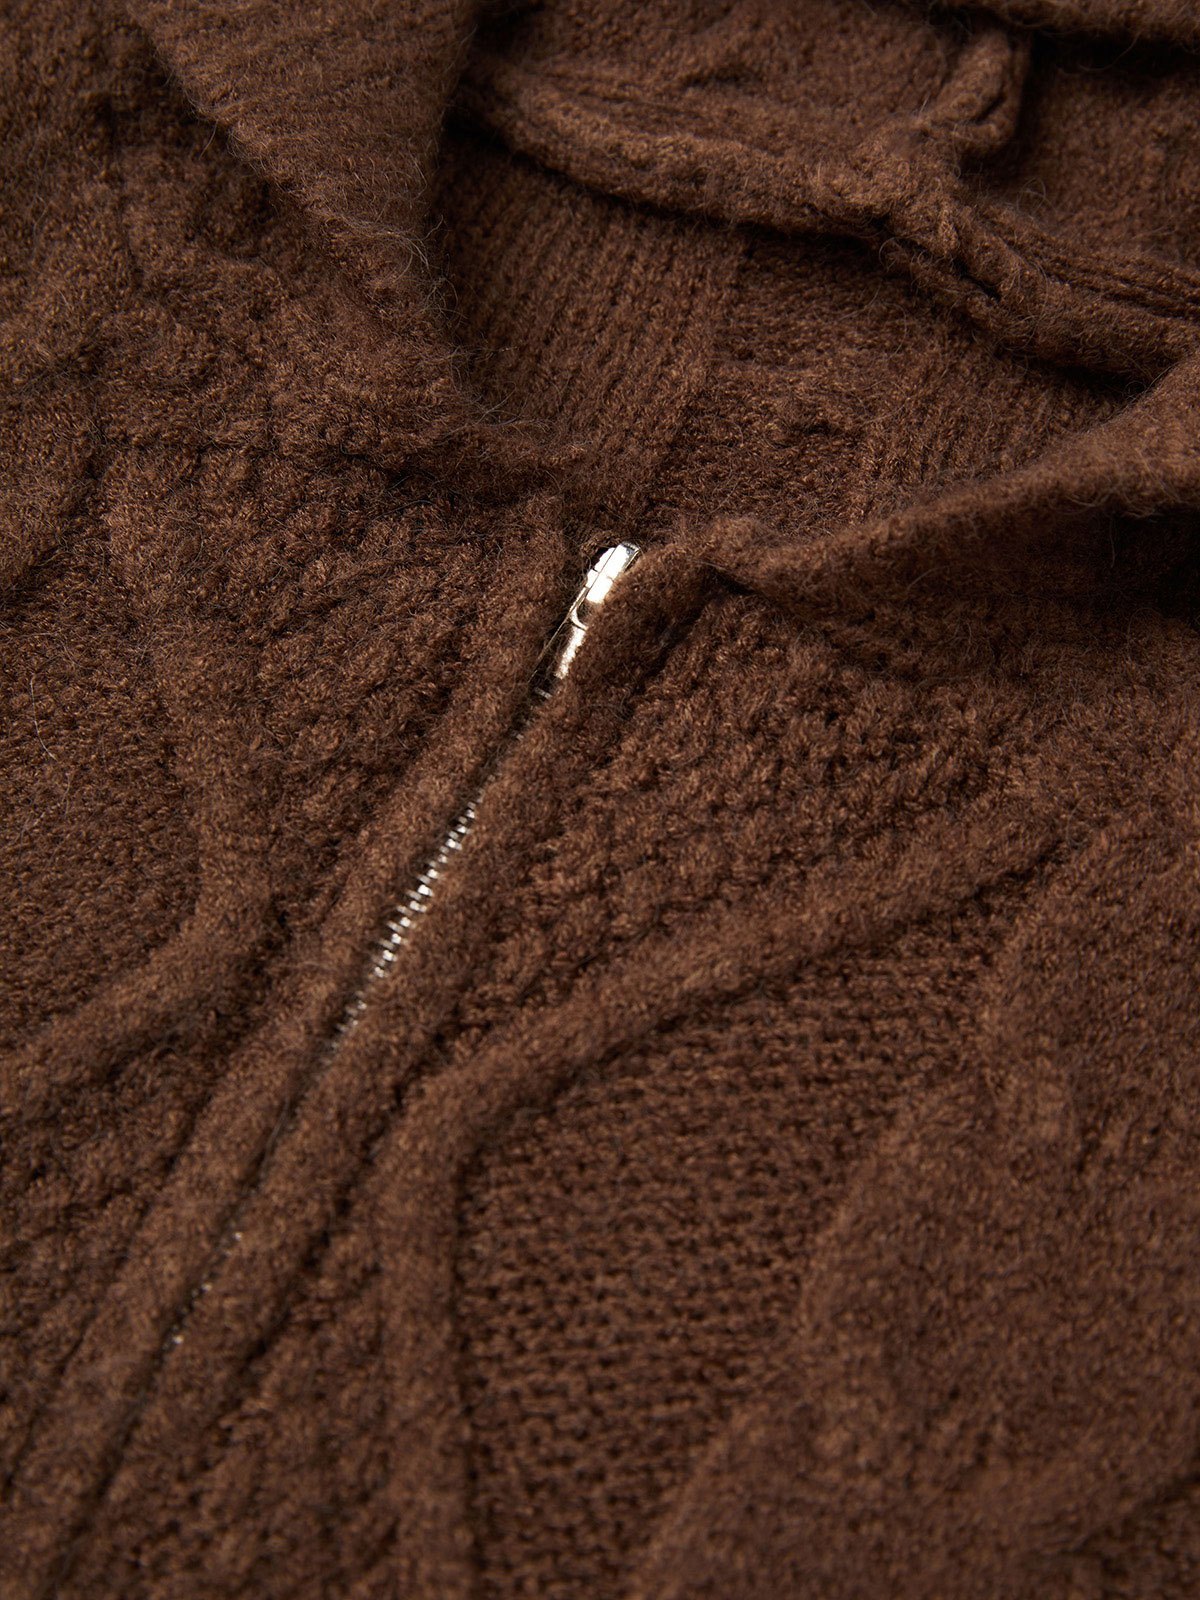 Oversize Brown Cardigan with Hood